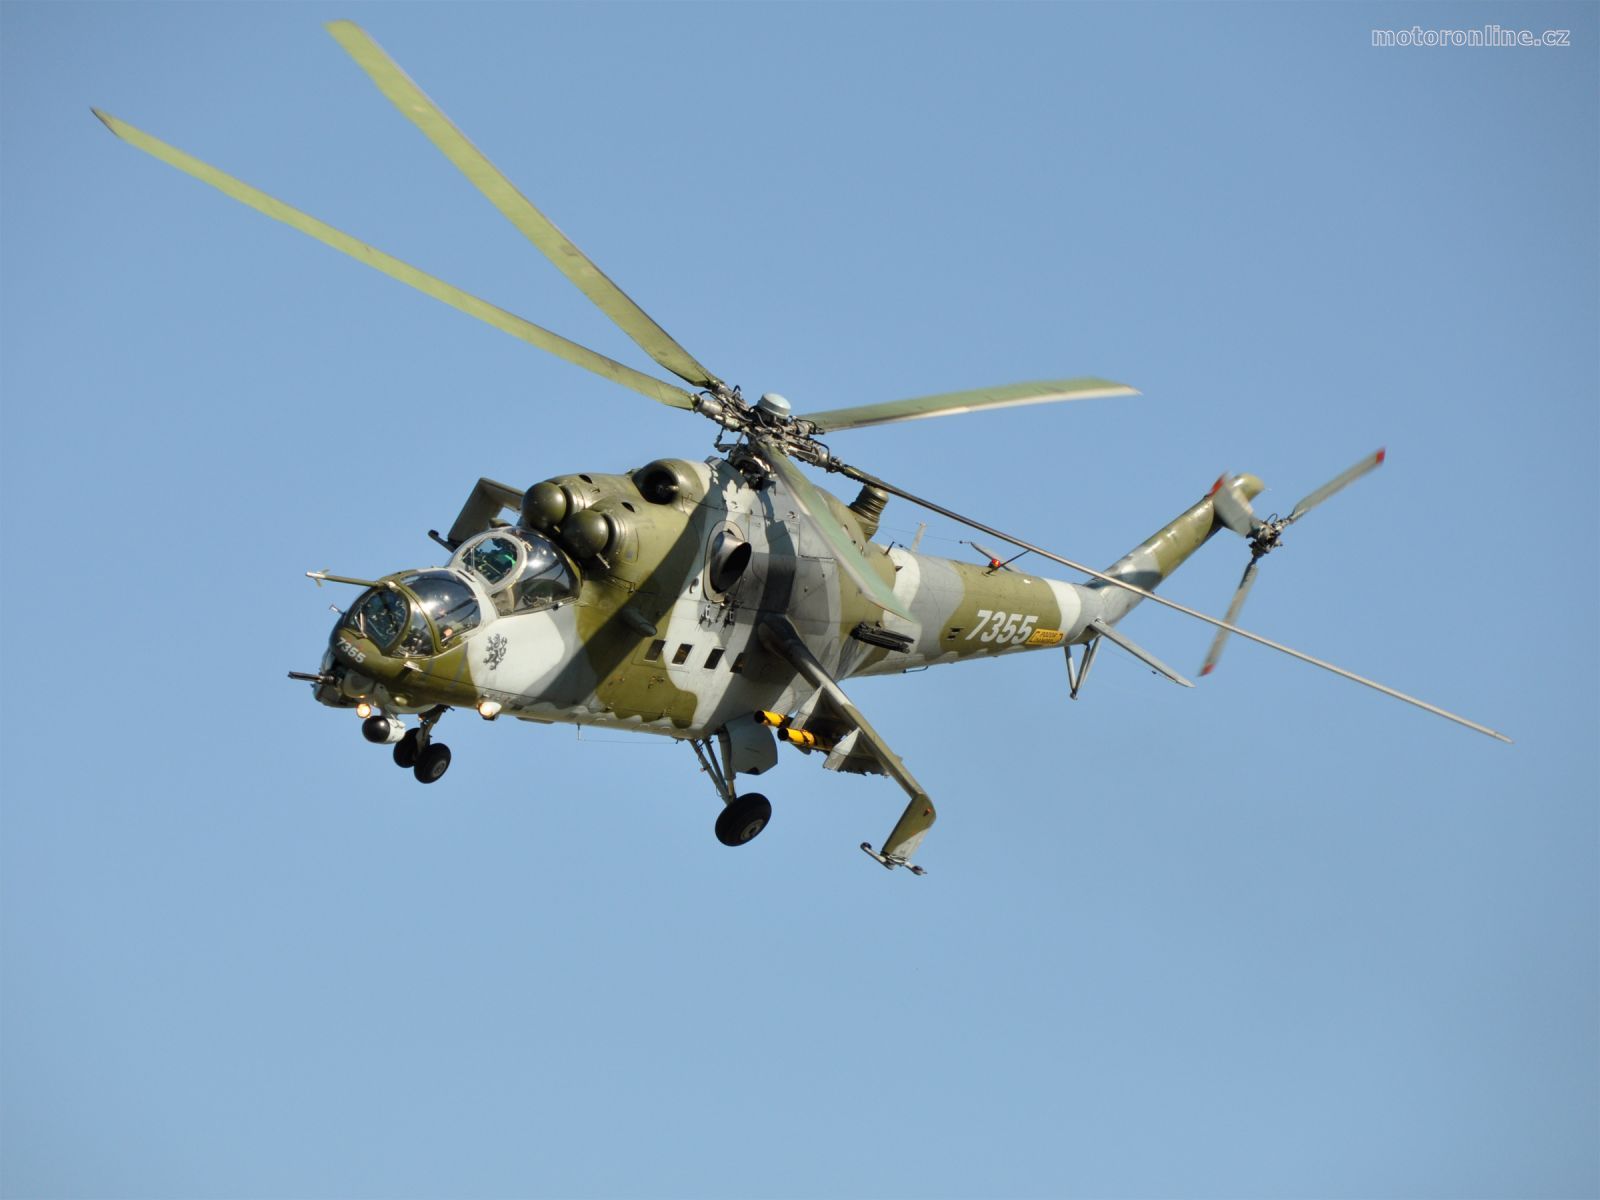 Helicopter MI 24 HIND